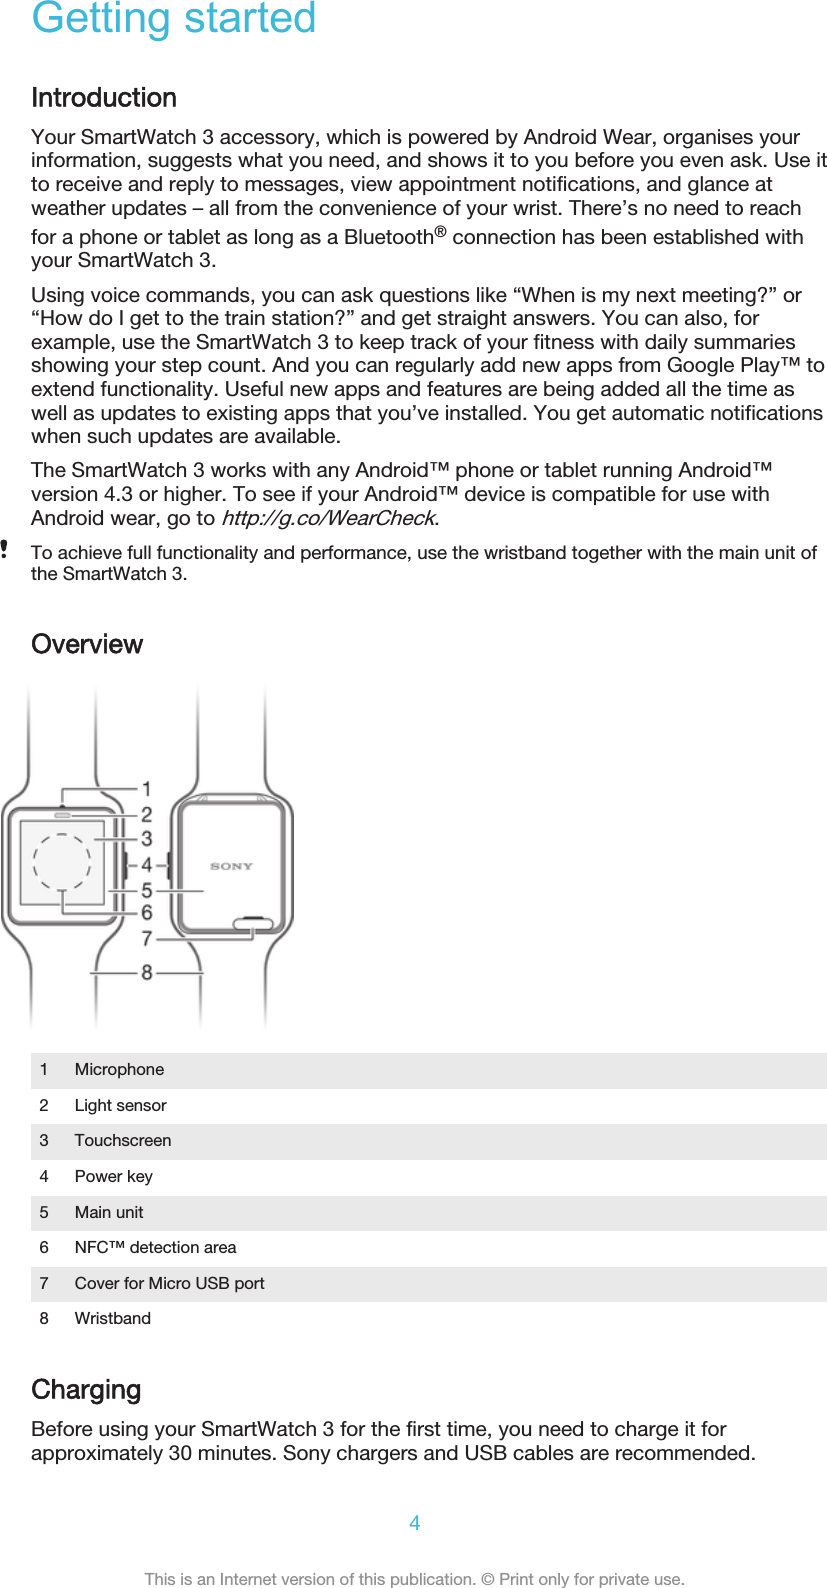 Getting startedIntroductionYour SmartWatch 3 accessory, which is powered by Android Wear, organises yourinformation, suggests what you need, and shows it to you before you even ask. Use itto receive and reply to messages, view appointment notifications, and glance atweather updates – all from the convenience of your wrist. There’s no need to reachfor a phone or tablet as long as a Bluetooth® connection has been established withyour SmartWatch 3.Using voice commands, you can ask questions like “When is my next meeting?” or“How do I get to the train station?” and get straight answers. You can also, forexample, use the SmartWatch 3 to keep track of your fitness with daily summariesshowing your step count. And you can regularly add new apps from Google Play™ toextend functionality. Useful new apps and features are being added all the time aswell as updates to existing apps that you’ve installed. You get automatic notificationswhen such updates are available.The SmartWatch 3 works with any Android™ phone or tablet running Android™version 4.3 or higher. To see if your Android™ device is compatible for use withAndroid wear, go to http://g.co/WearCheck.To achieve full functionality and performance, use the wristband together with the main unit ofthe SmartWatch 3.Overview1 Microphone2 Light sensor3 Touchscreen4 Power key5 Main unit6 NFC™ detection area7 Cover for Micro USB port8 WristbandChargingBefore using your SmartWatch 3 for the first time, you need to charge it forapproximately 30 minutes. Sony chargers and USB cables are recommended.4This is an Internet version of this publication. © Print only for private use.